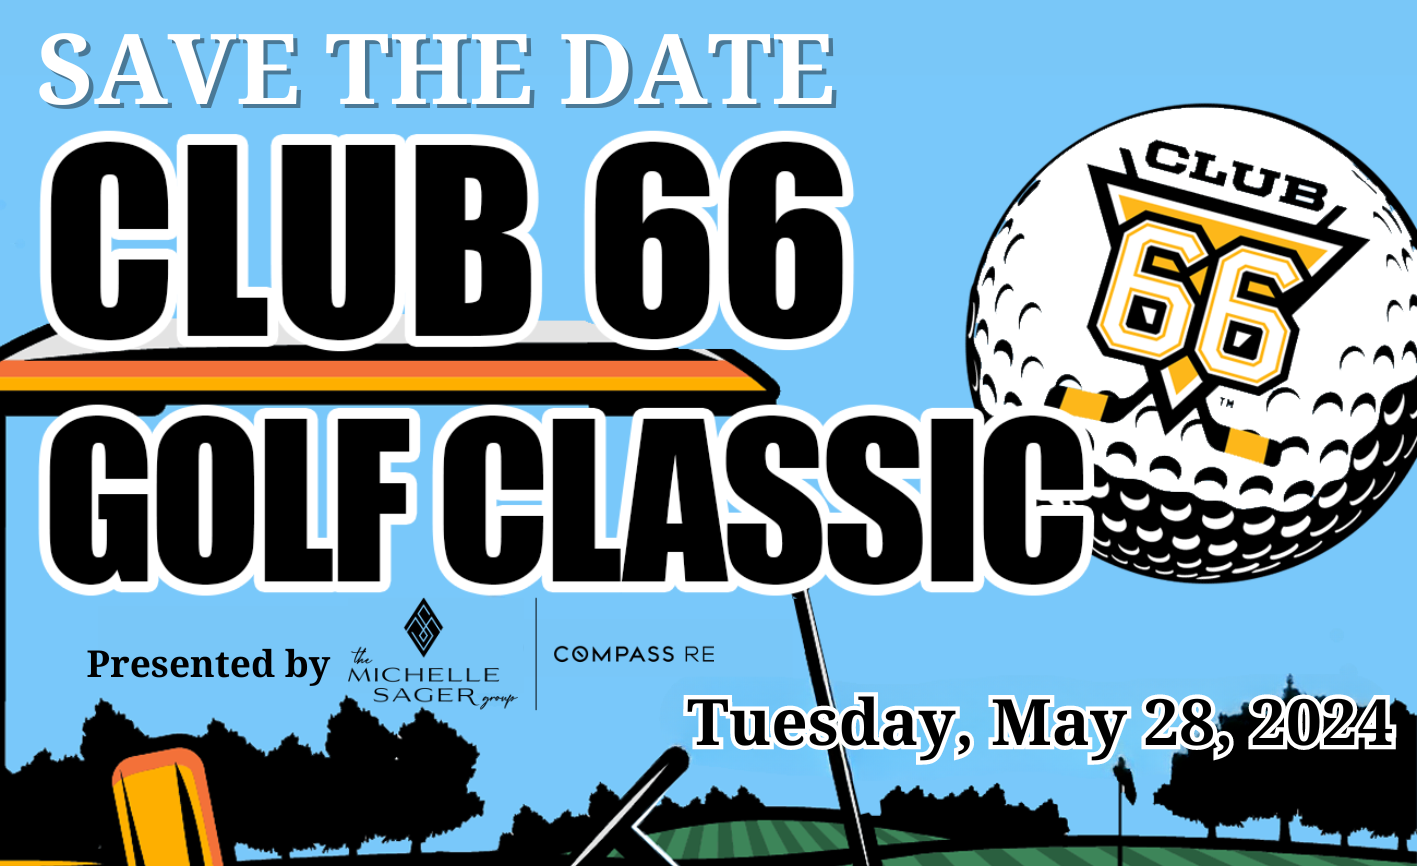 Club 66 Golf Classic presented by The Michelle Sager Group at Compass RE